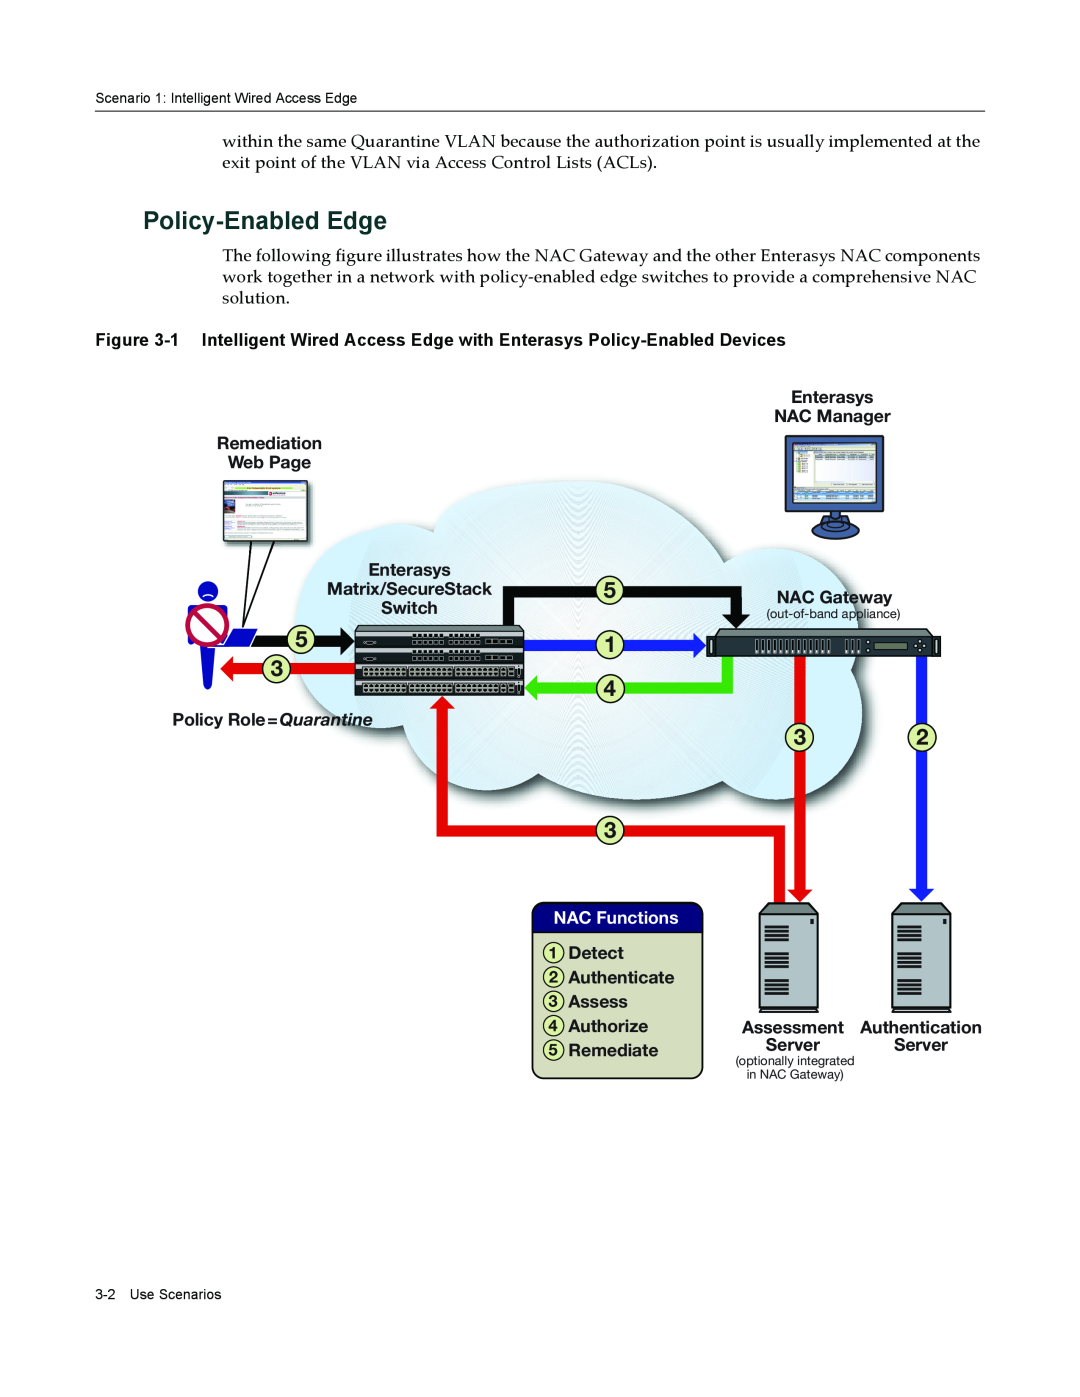 Enterasys Networks 9034385 Policy-Enabled Edge, Enterasys NAC Manager Remediation Web Page, Matrix/SecureStack, Switch 